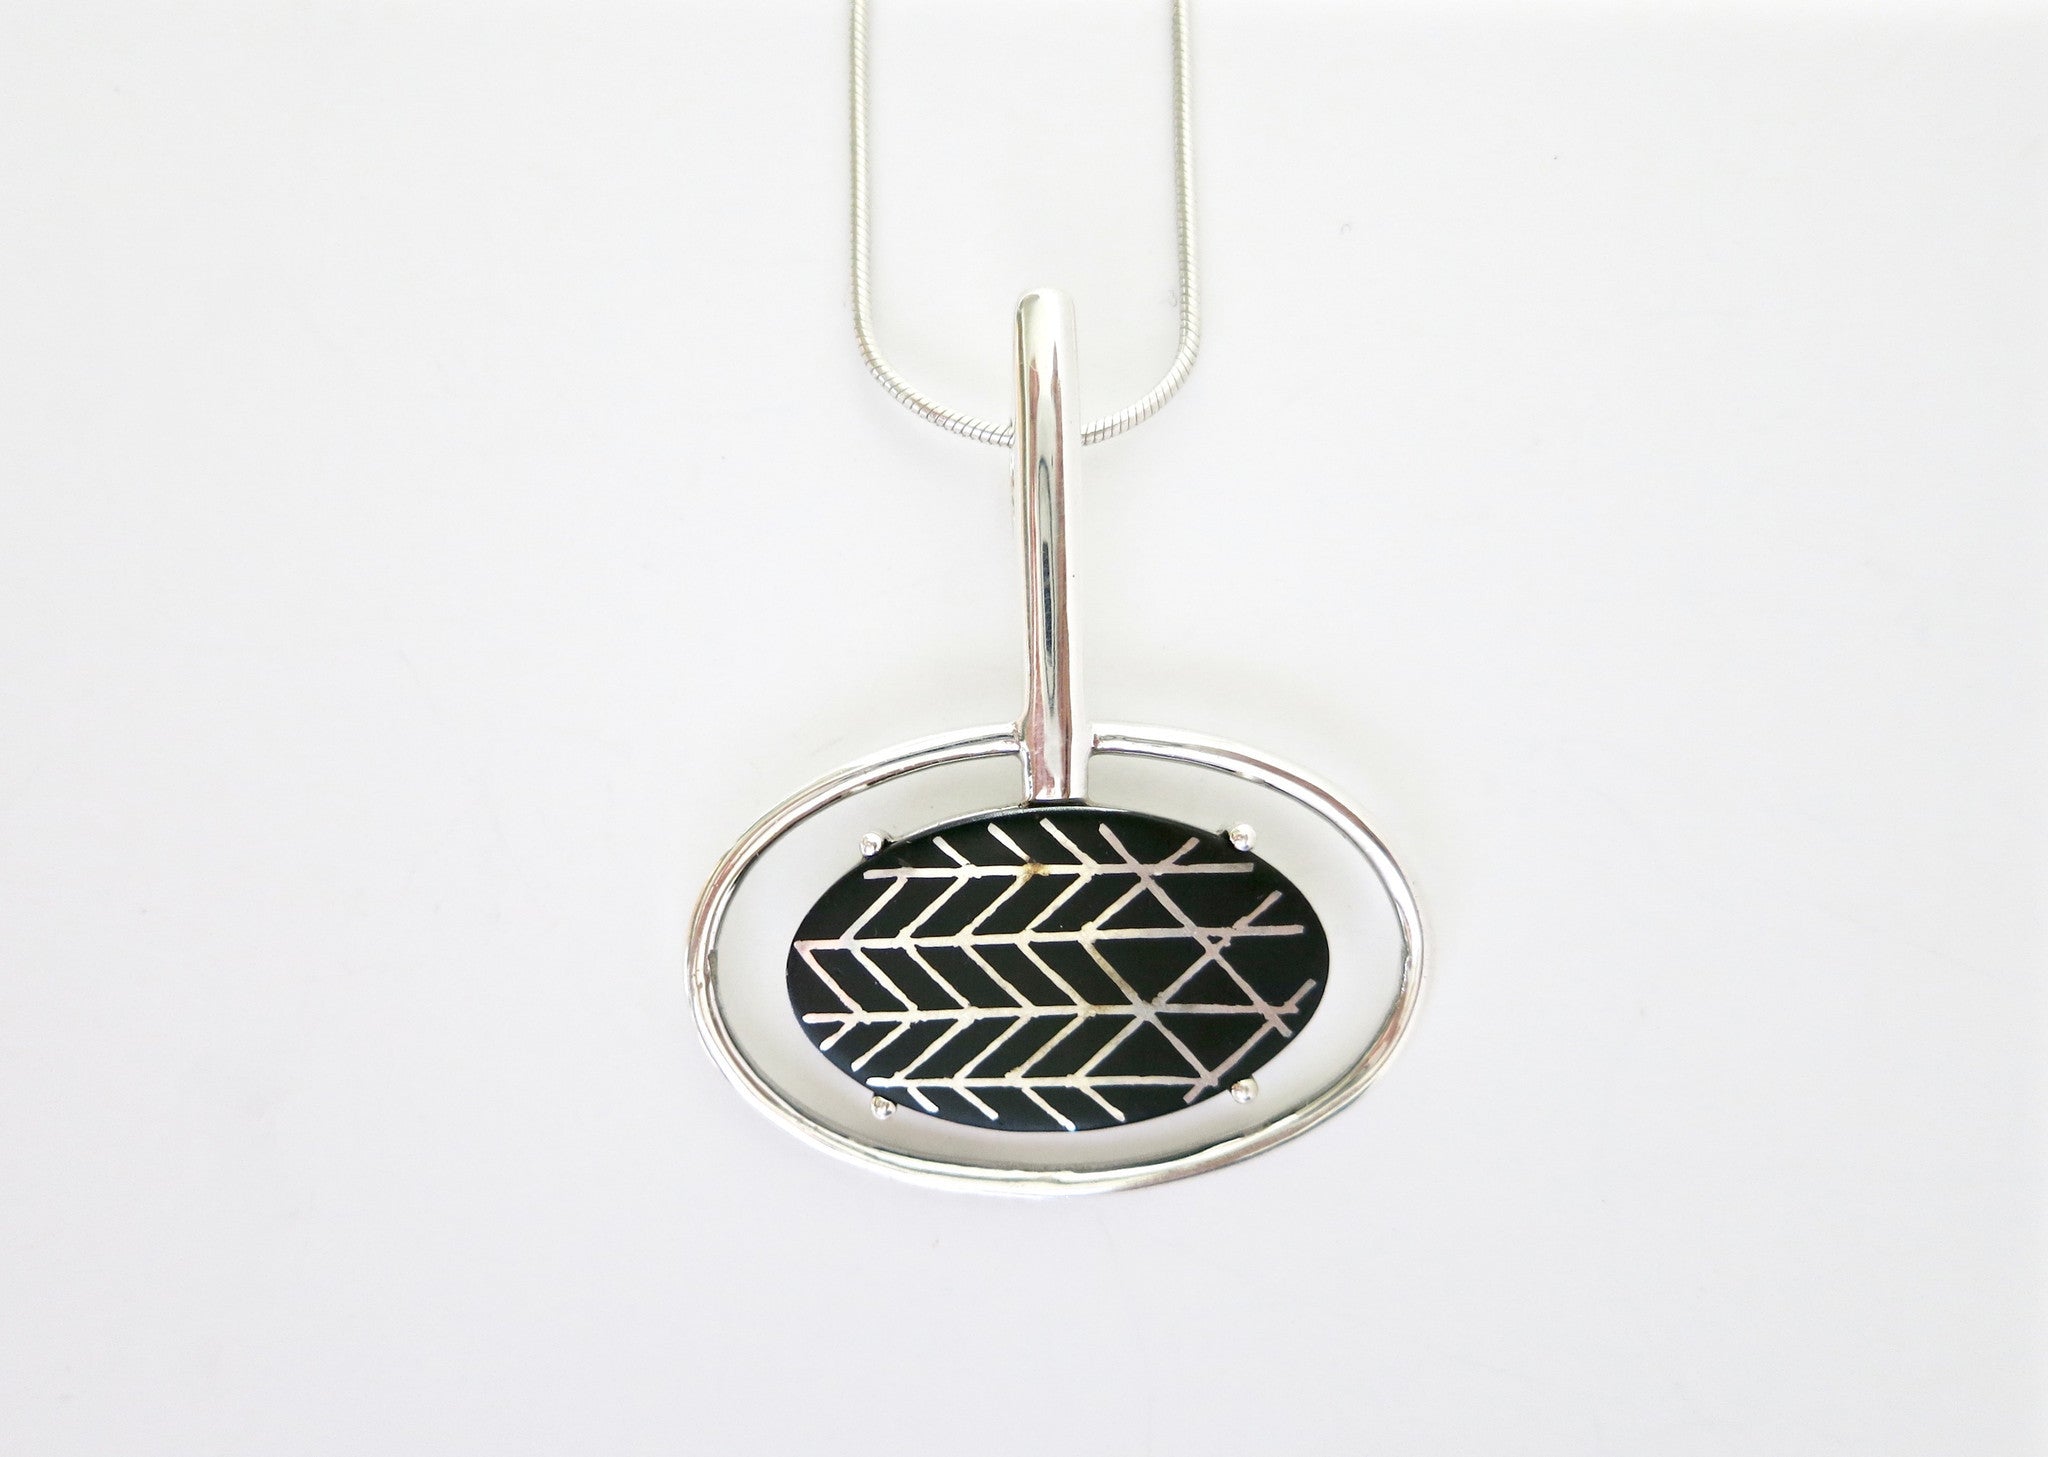 Contemporary, sophisticated oval Bidri pendant (PB-9184-P)  Necklace, Pendant Sterling silver handcrafted jewellery. 925 pure silver jewellery. Handmade in India, fair trade, artisan jewellery. Lai